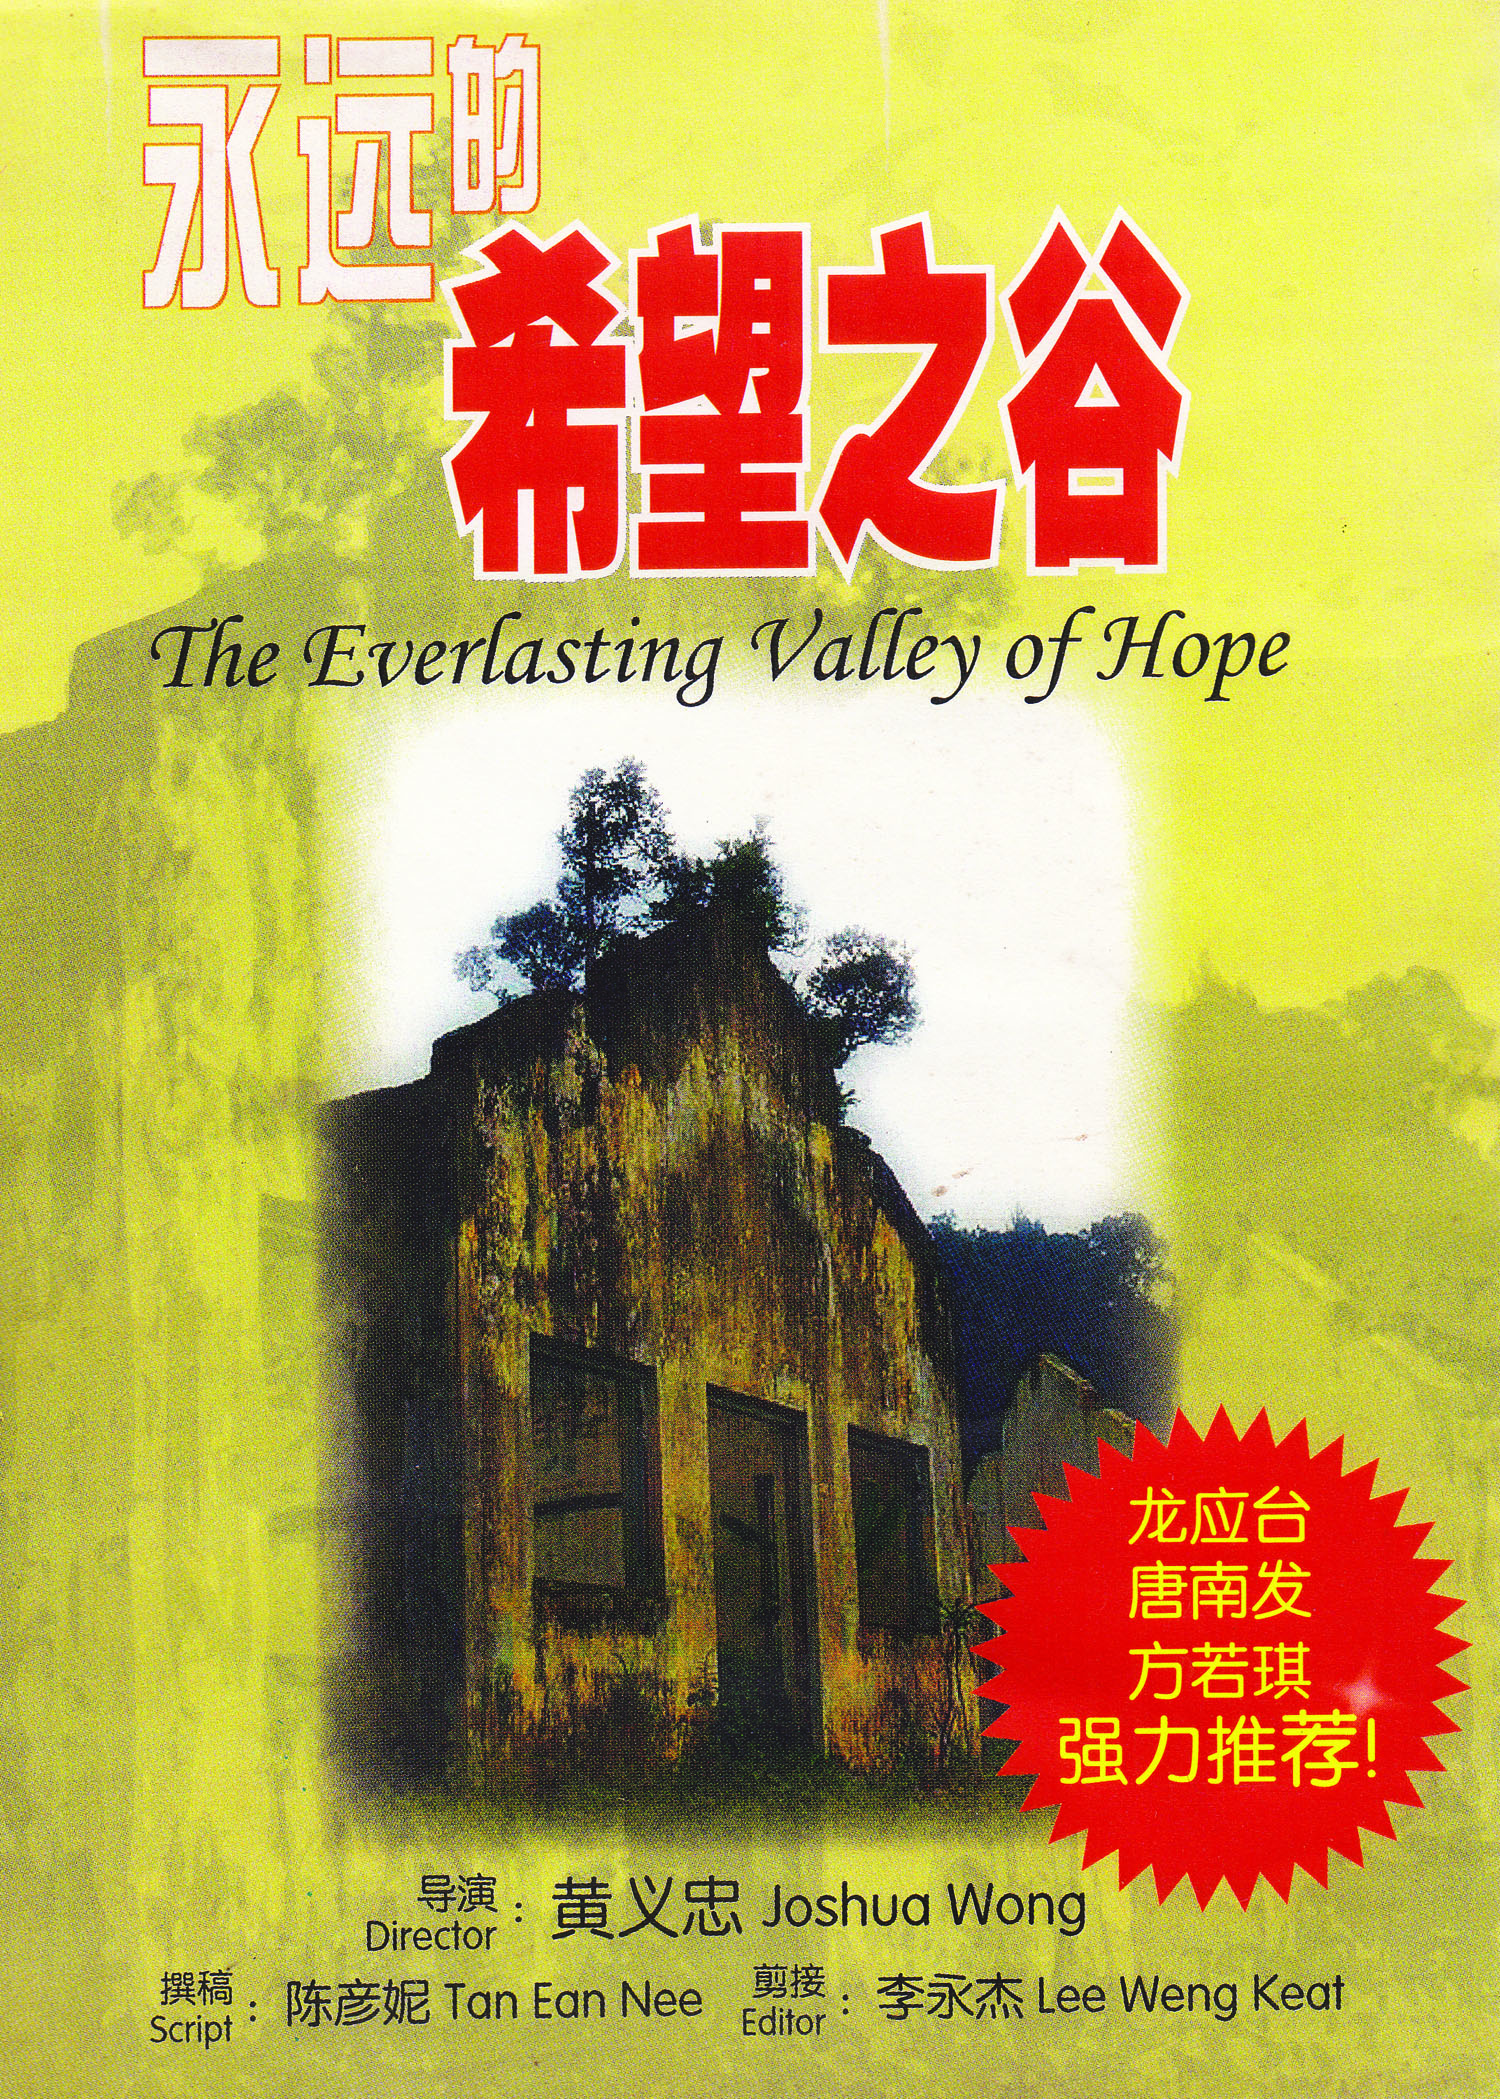  The Everlasting Valley of Hope, Chinese documentary, produced by Joshua Wong &amp; Tan Ean Nee, 2009. (photo by Tan Ean Nee) 